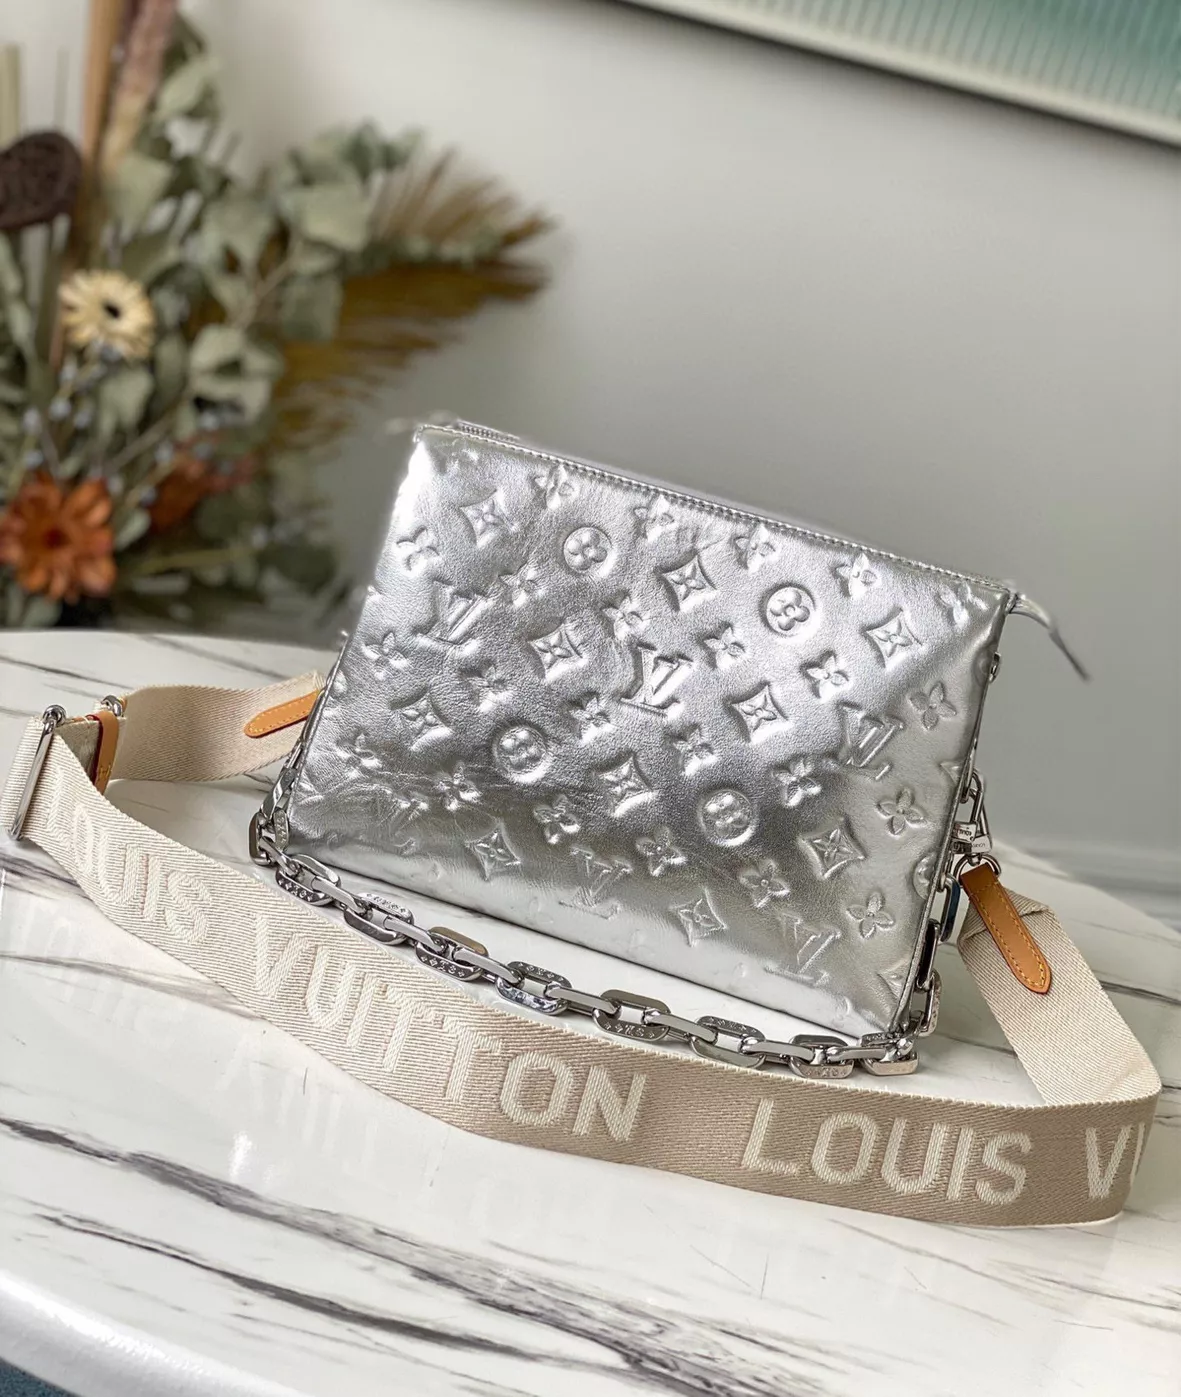 THE NEW LOUIS VUITTON COUSSIN BAG 2021  THE NEW HOT IT BAG 🔥 * Is It  Worth It? My Overall Thoughts 